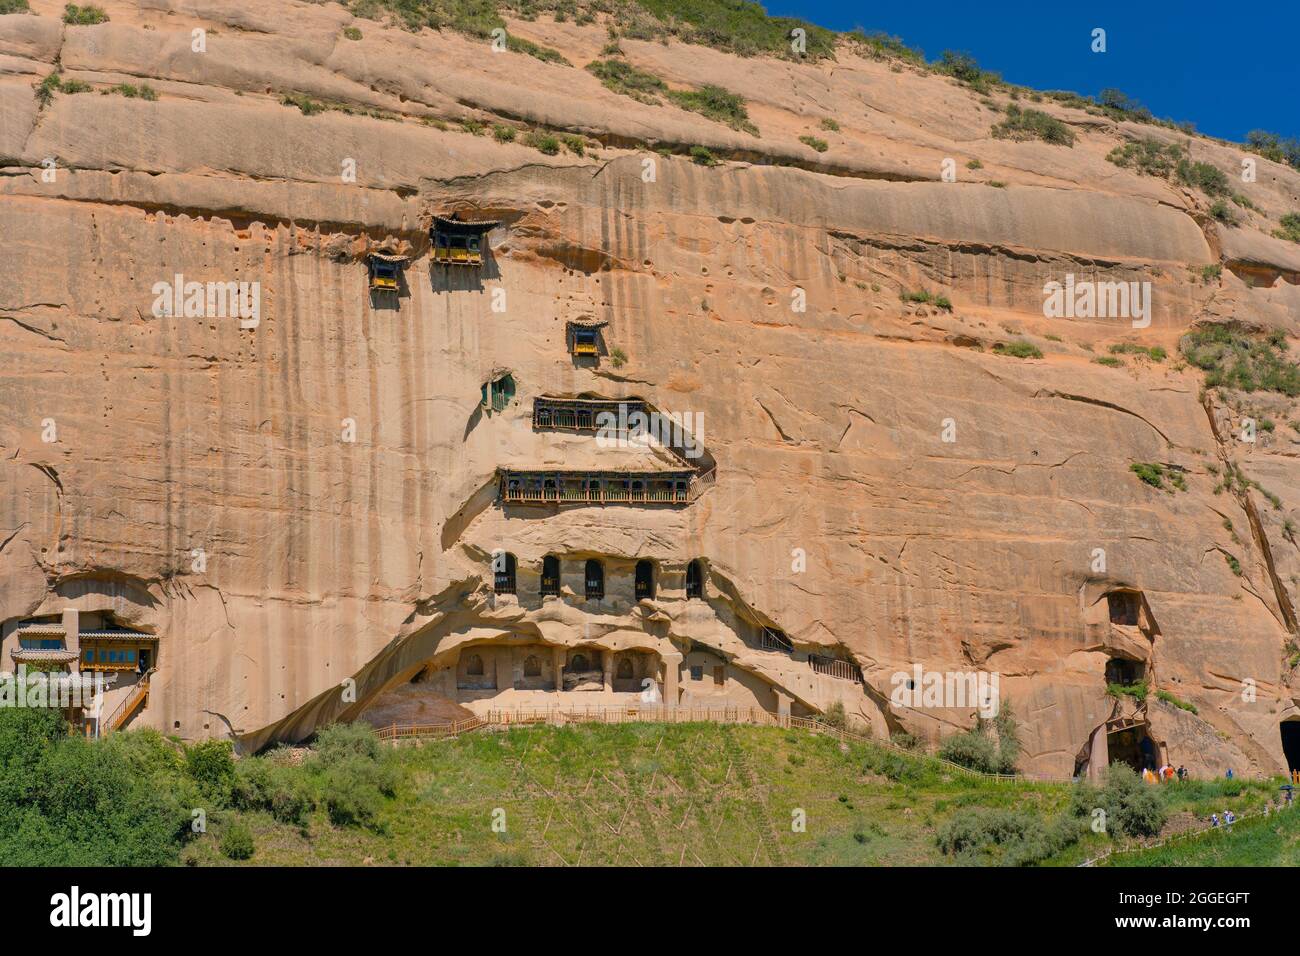 The Mati temple, a historic buddhism temple in Zhangye, Gansu province, China. Stock Photo